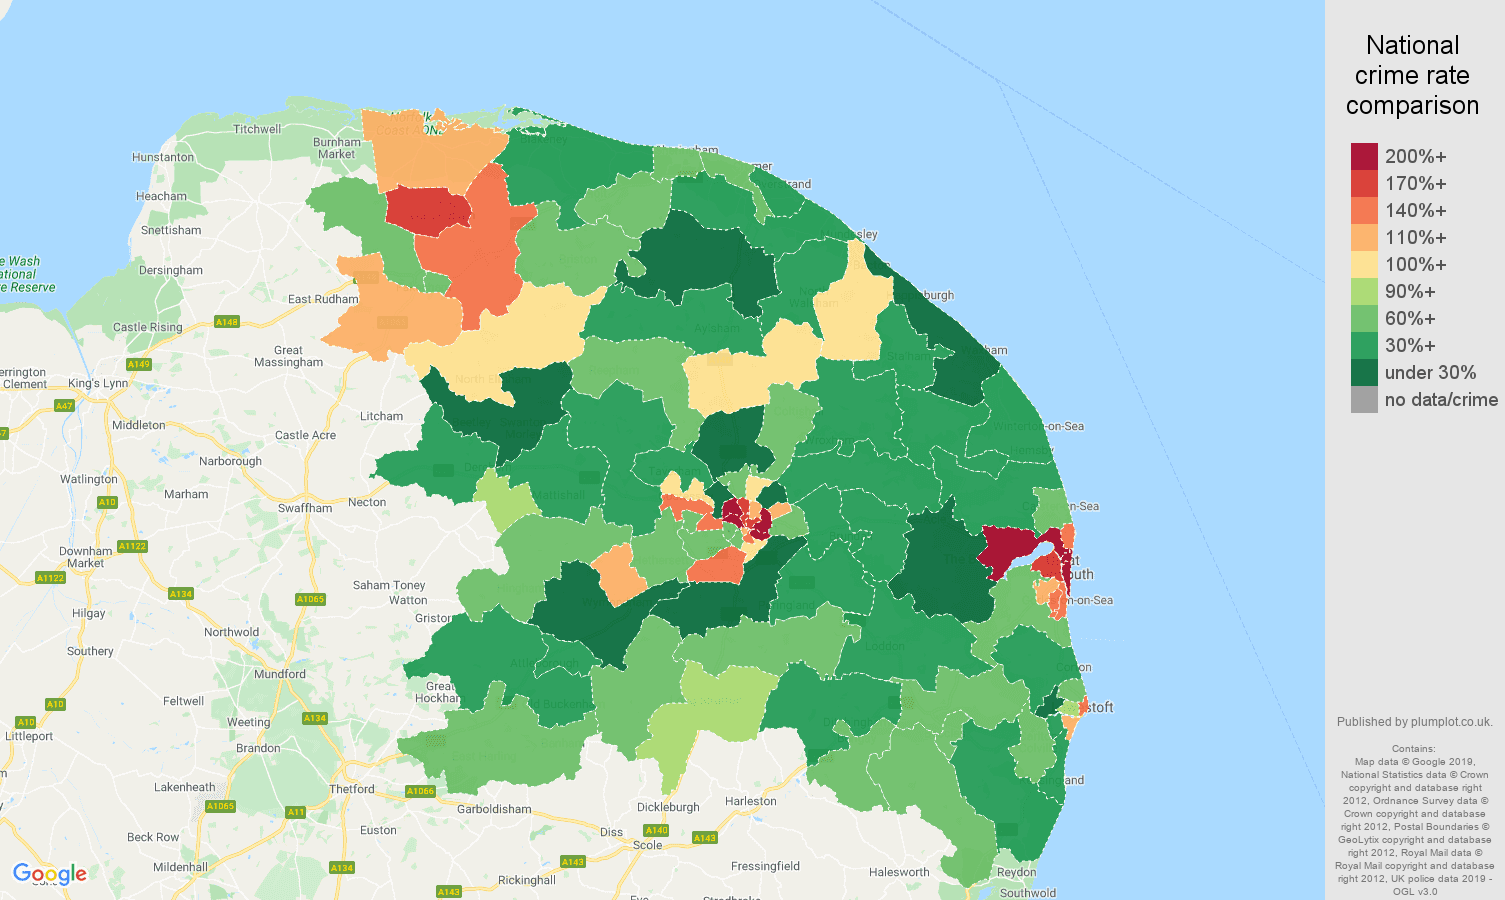 Norwich other crime rate comparison map